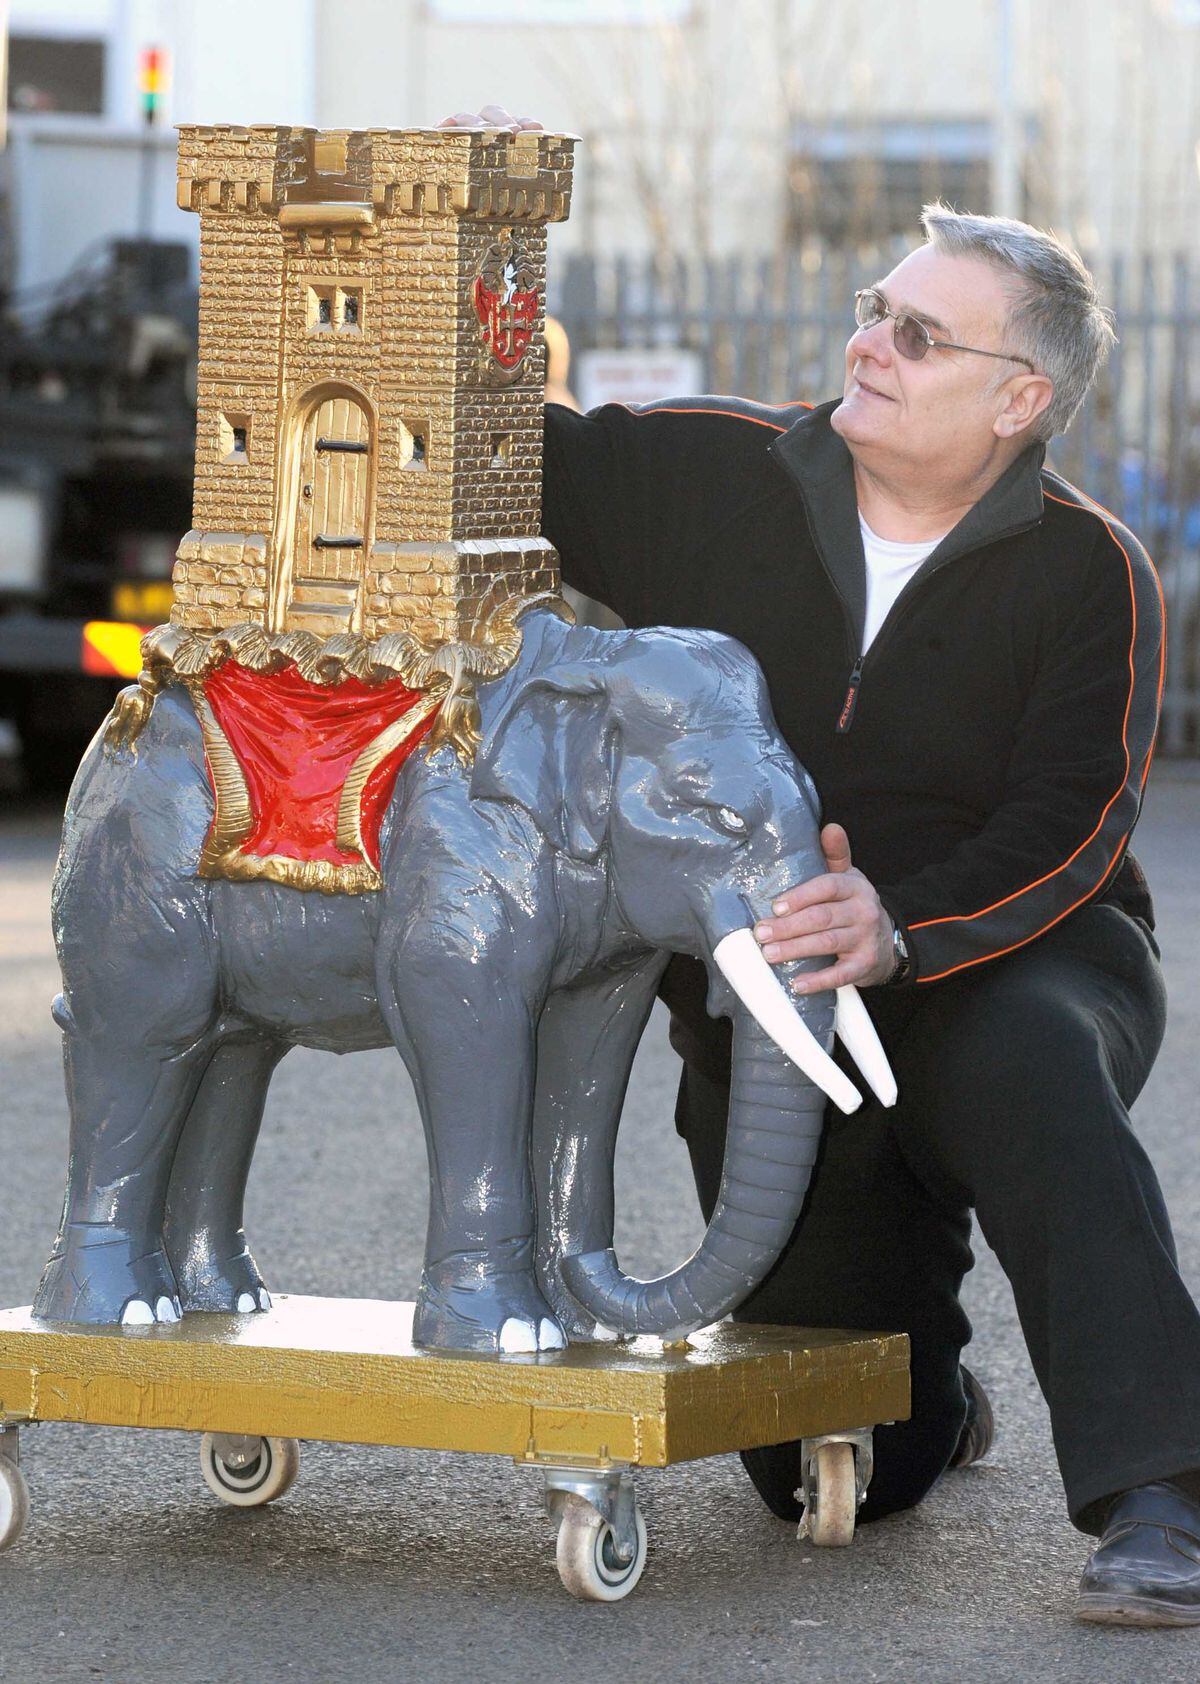 The elephant was saved and by 2008 had been restored by Steve Swift from Coven Body Repairs in Bushbury